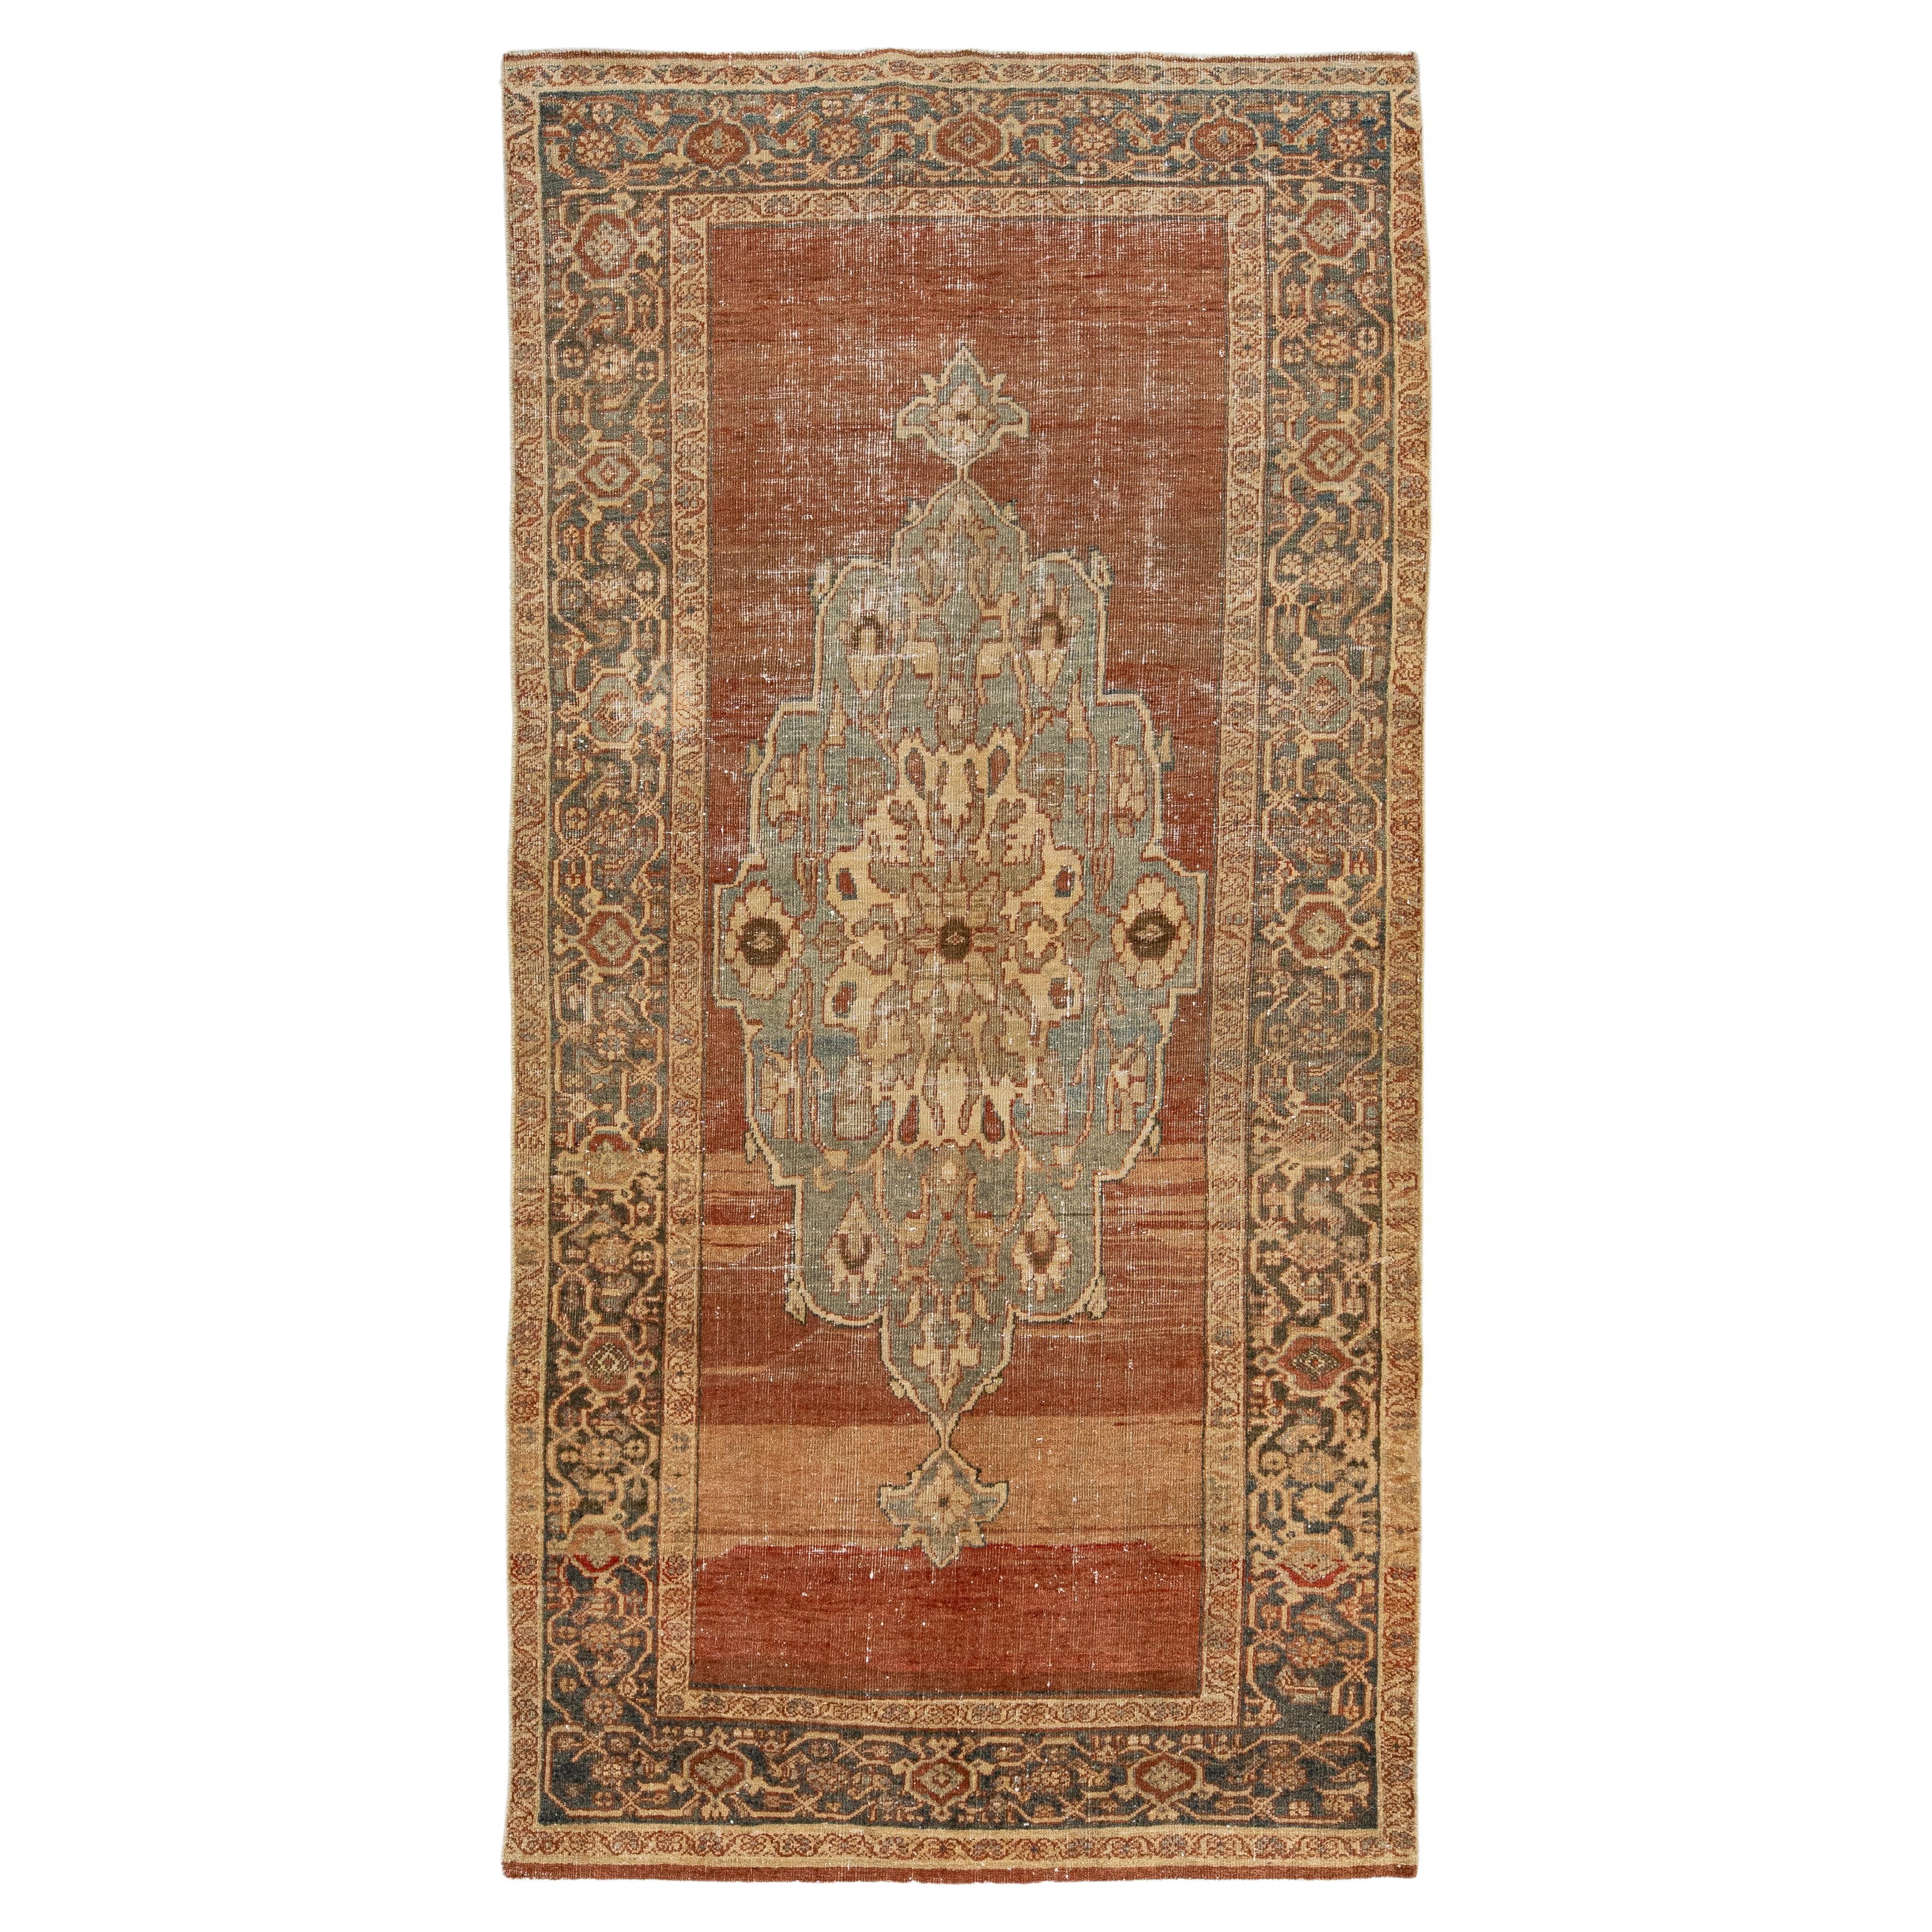 Medallion Designed Antique Mahal Wool Rug In Rust Color